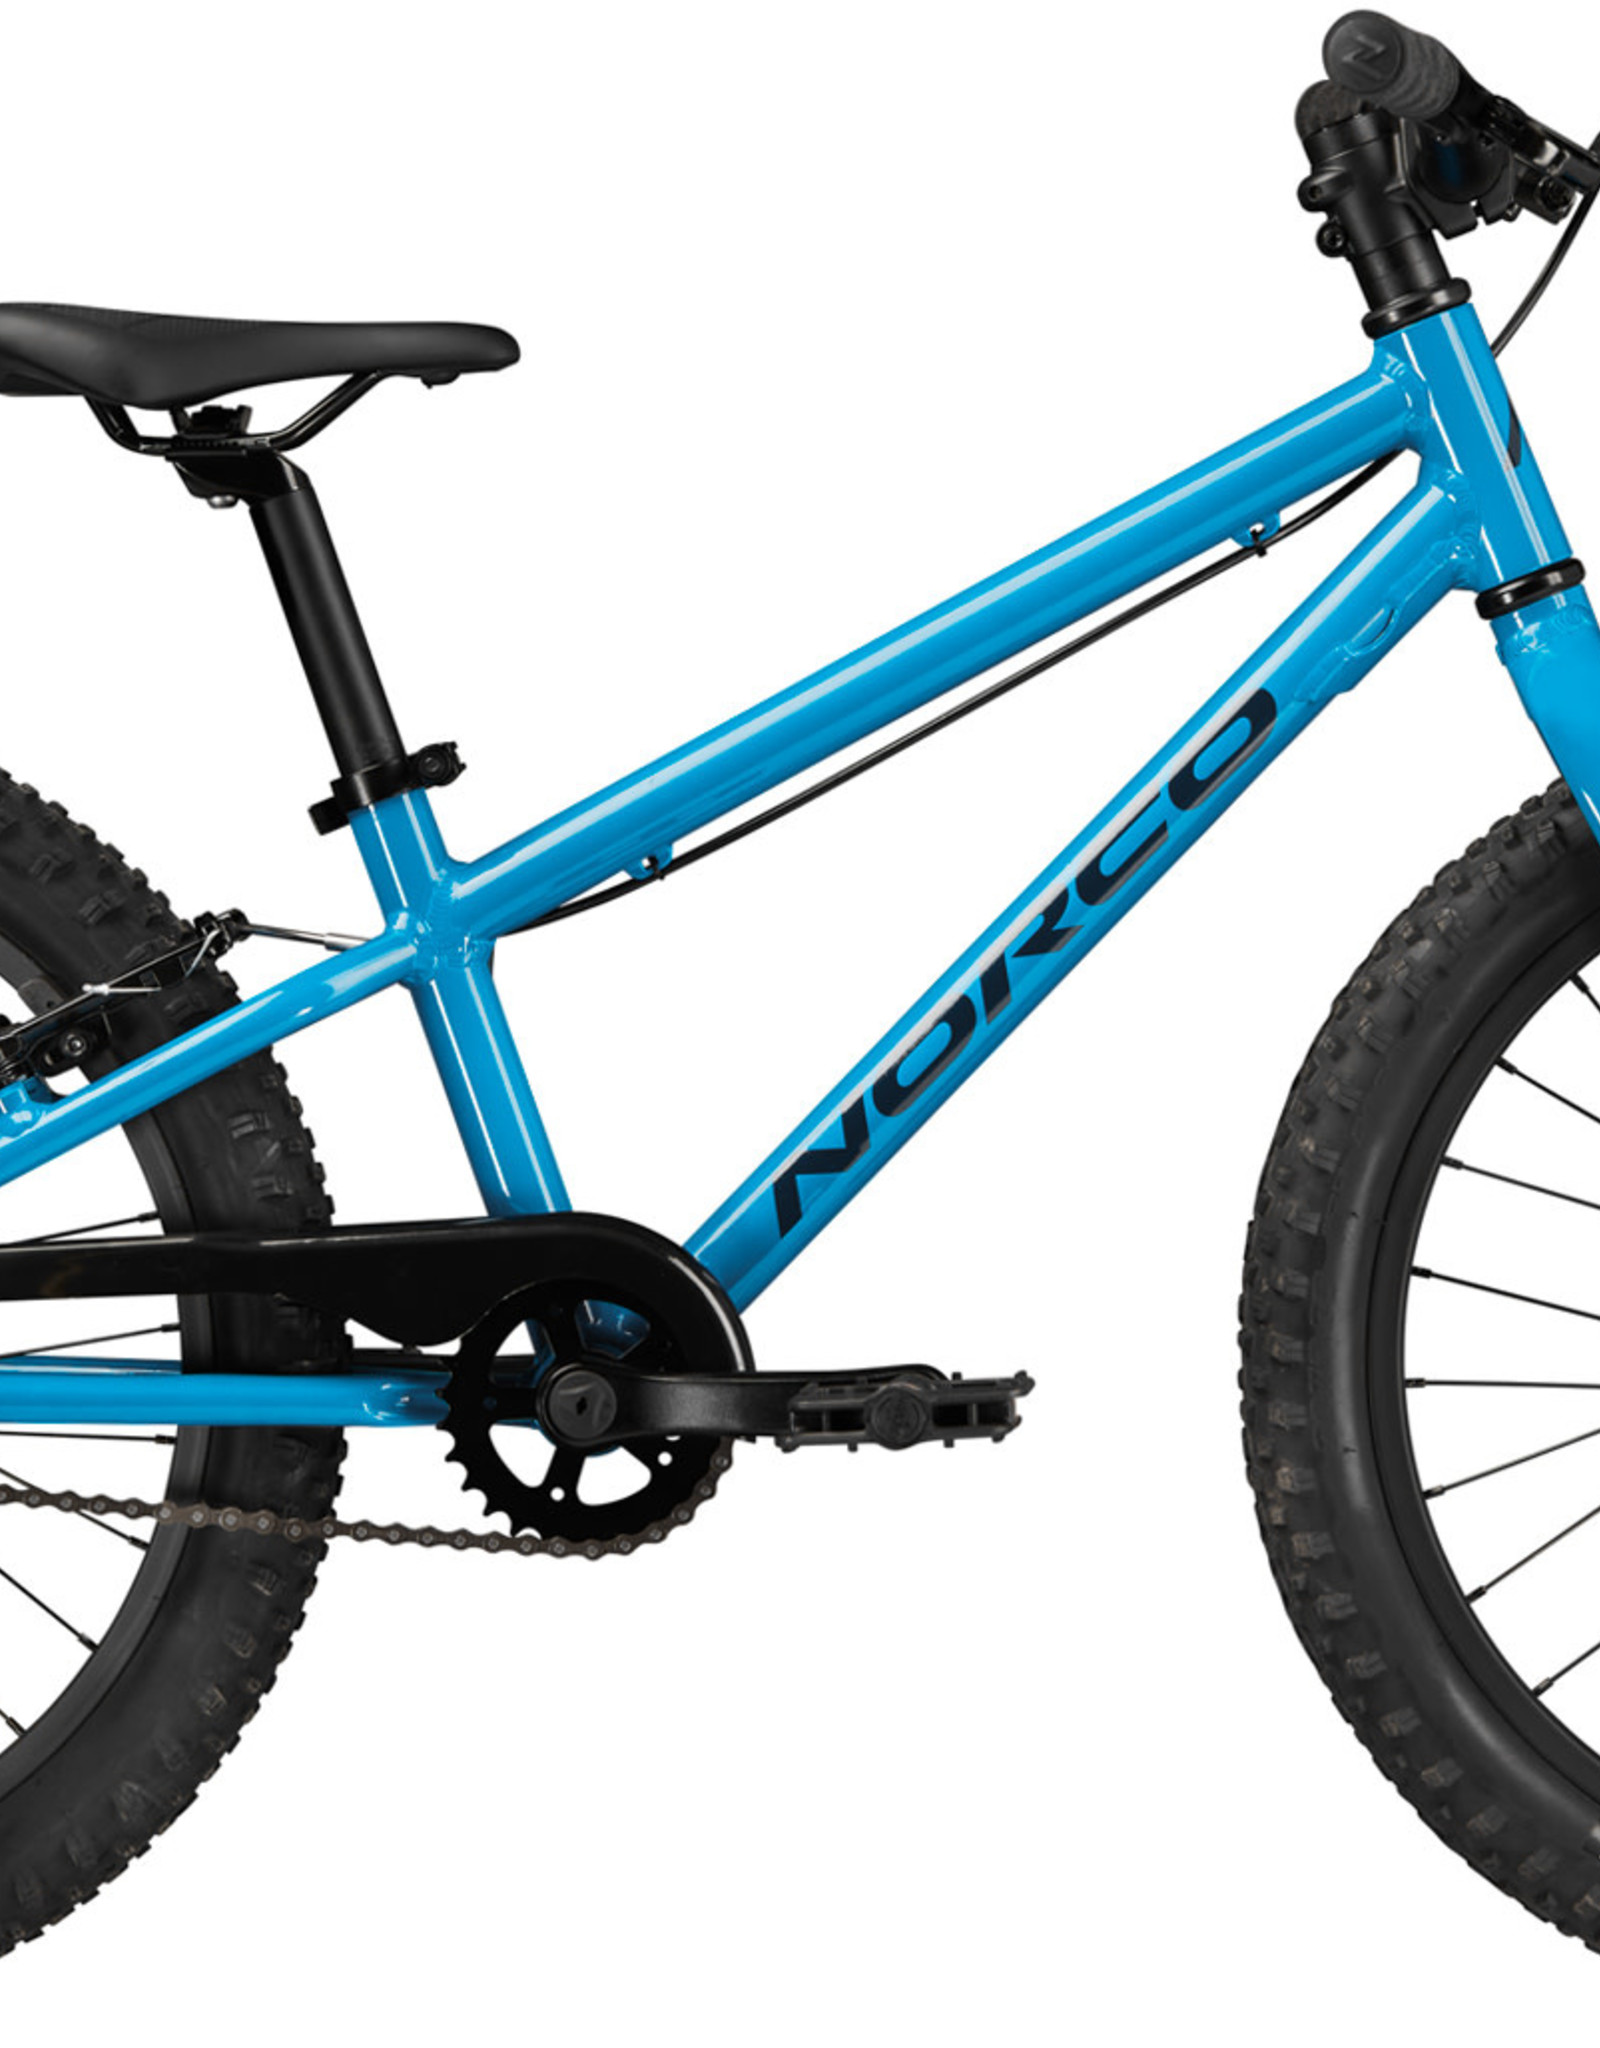 NORCO NORCO STORM 20" SS